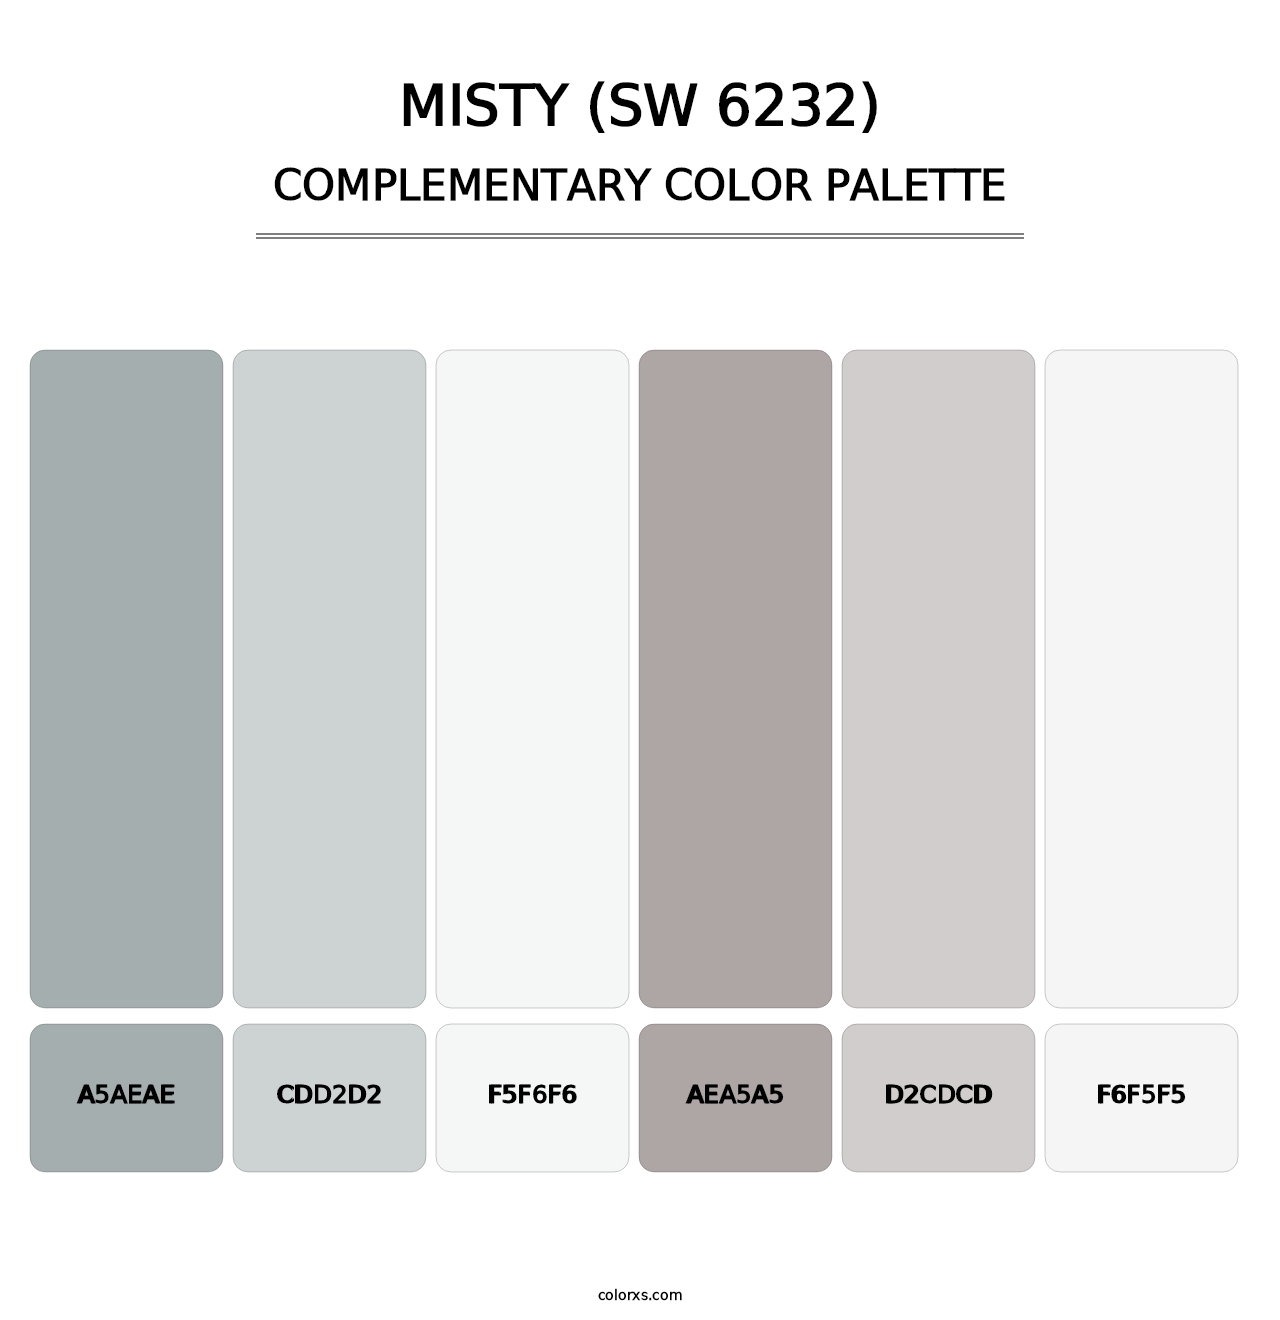 Misty (SW 6232) - Complementary Color Palette